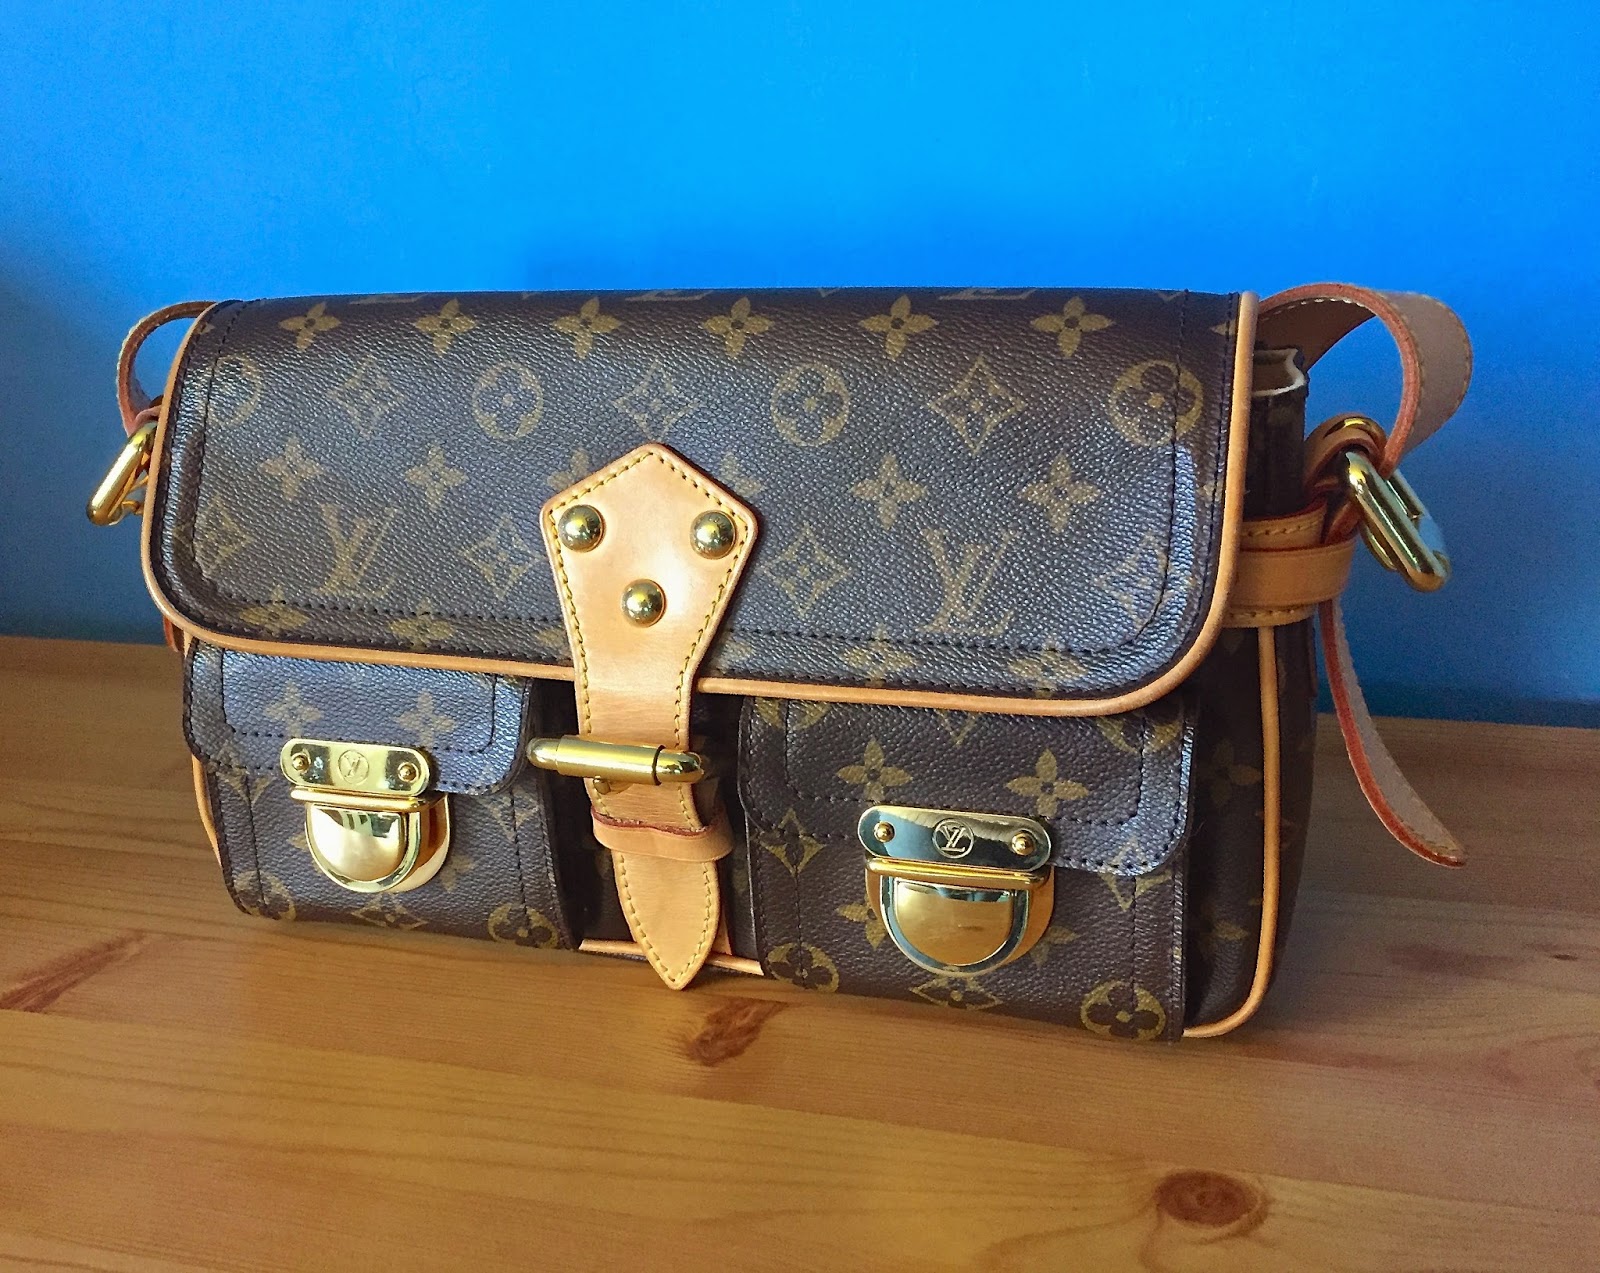 Introducing Maxwell Scott Bags | My beloved Louis Vuitton handbag that I've owned for years.